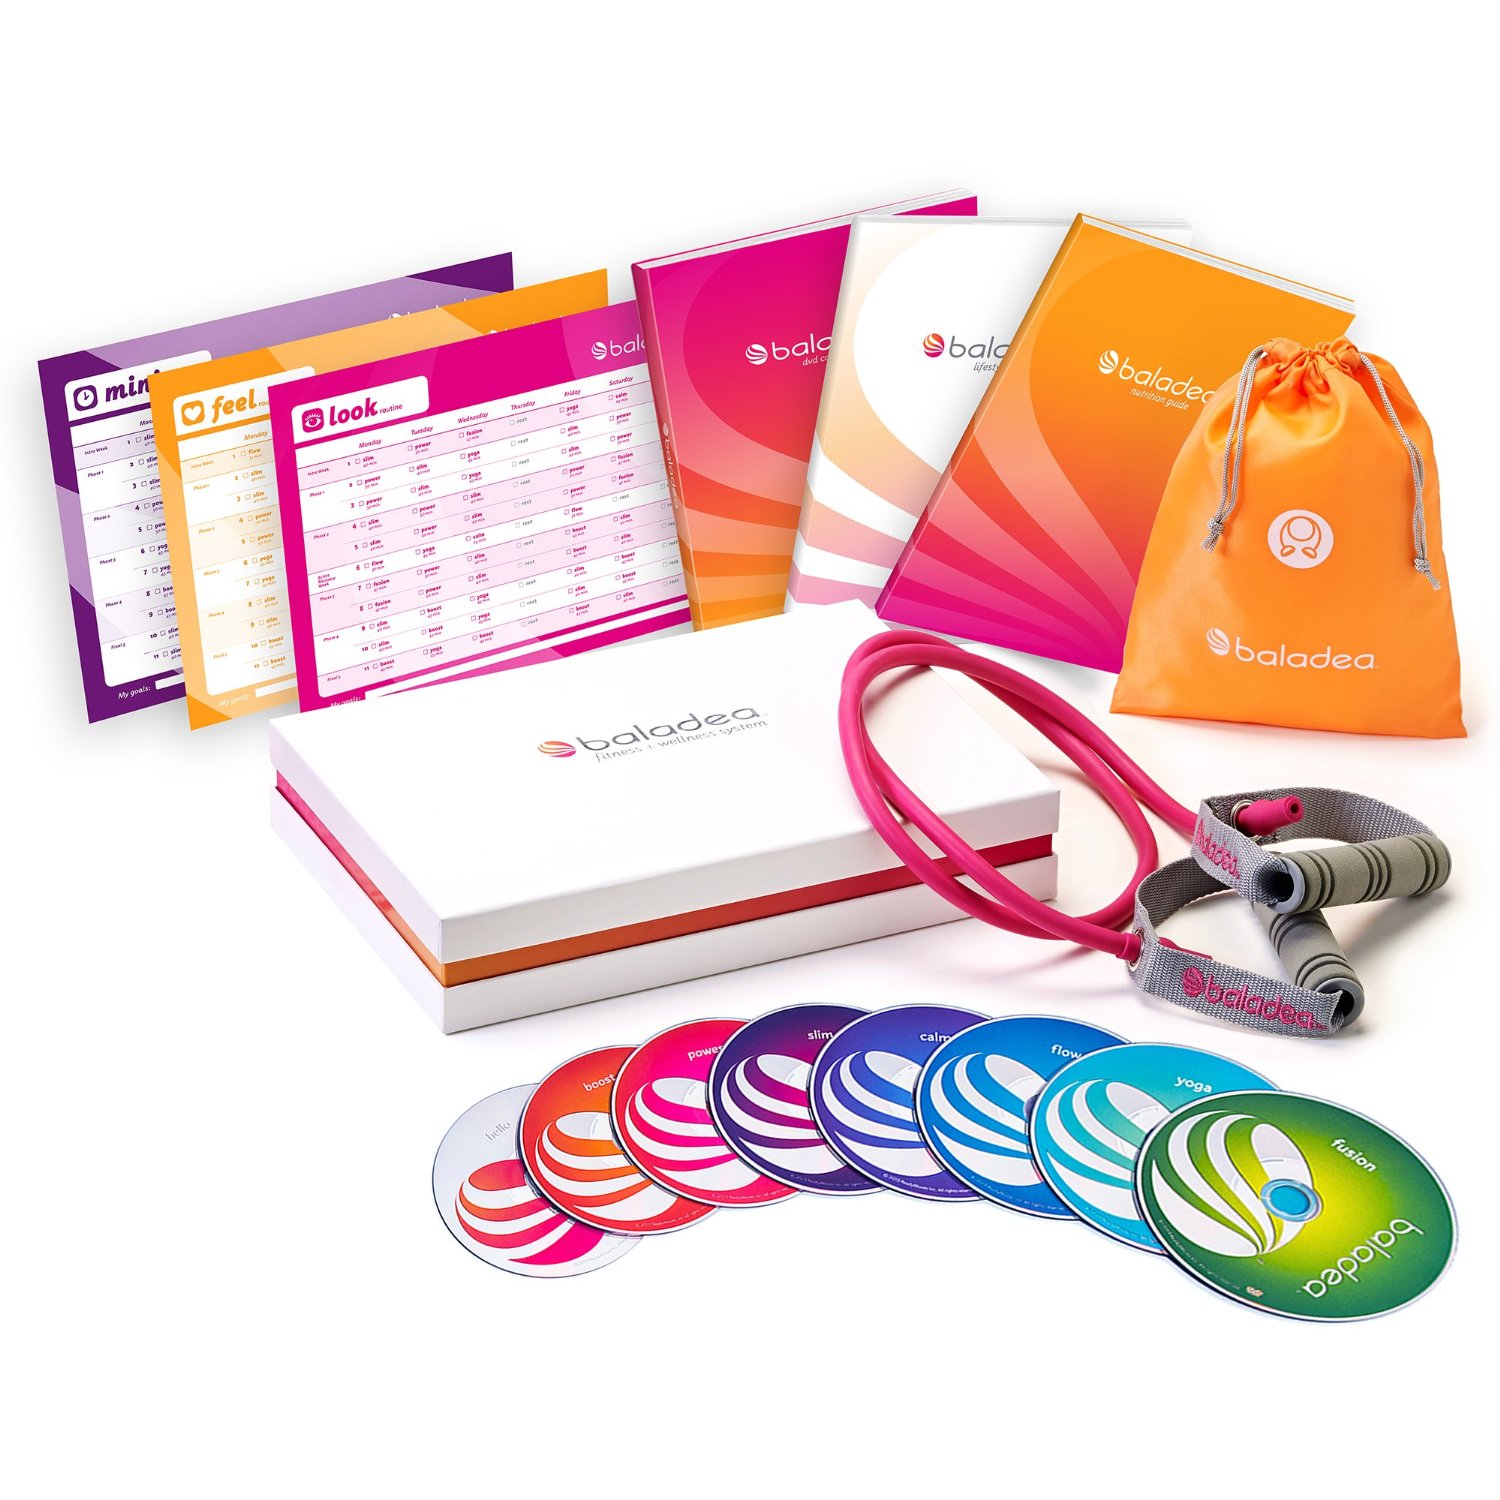 Baladea Fitness and Wellness System Including 8 Workout DVD’s Only $16.65 on Amazon!